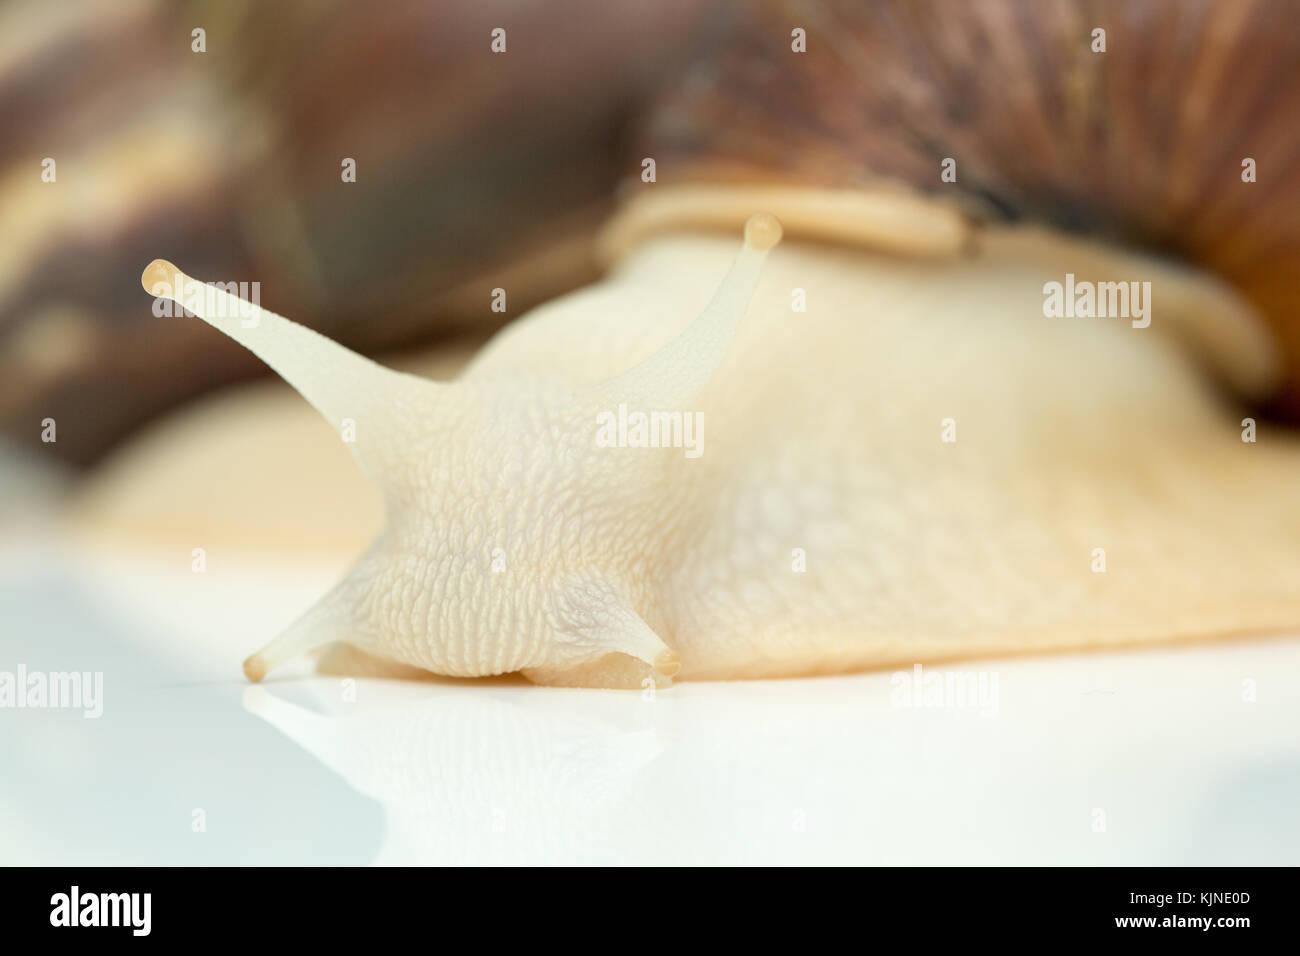 Giant snail Achatina is the largest land mollusk on Earth Stock Photo